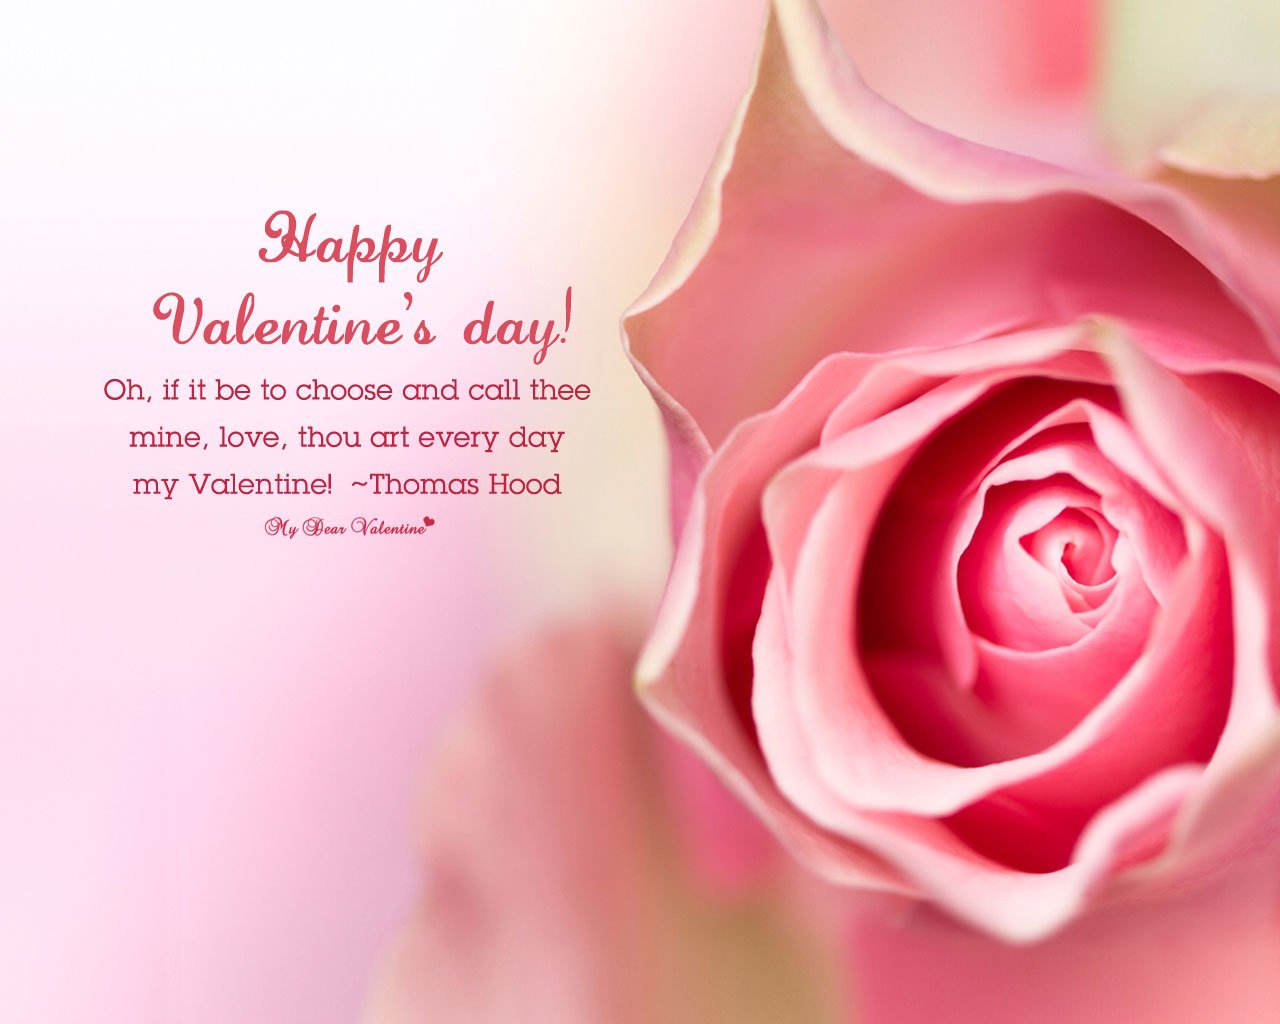 35 Happy Valentine’s Day HD Wallpapers, Backgrounds & Pictures – Designbolts1280 x 1024